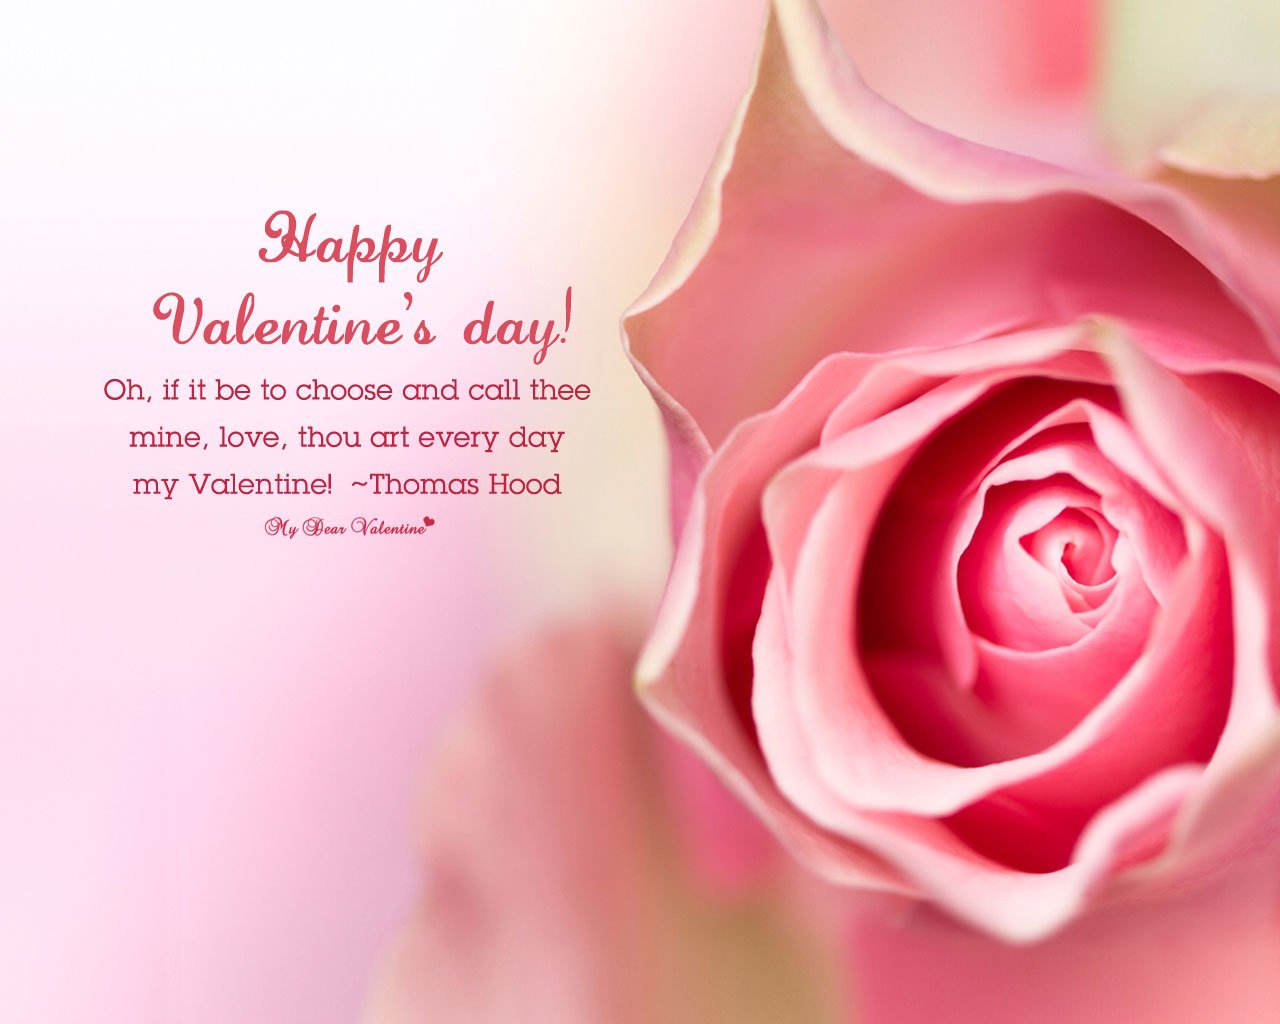 35 Happy Valentine’s Day HD Wallpapers, Backgrounds & Pictures – Designbolts1280 x 1024